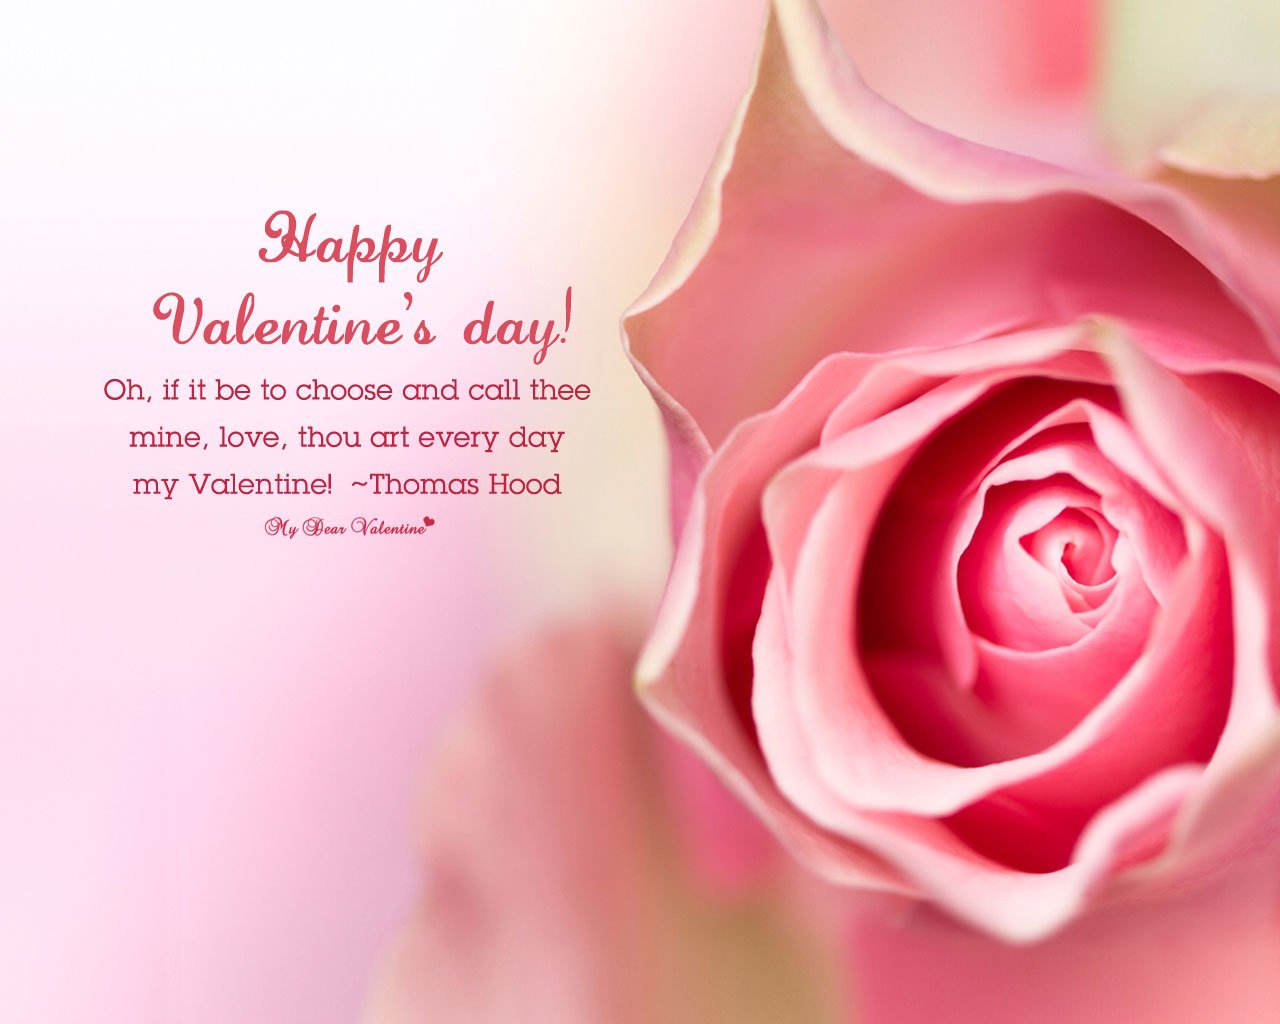 35 Happy Valentine’s Day HD Wallpapers, Backgrounds & Pictures – Designbolts1280 x 1024